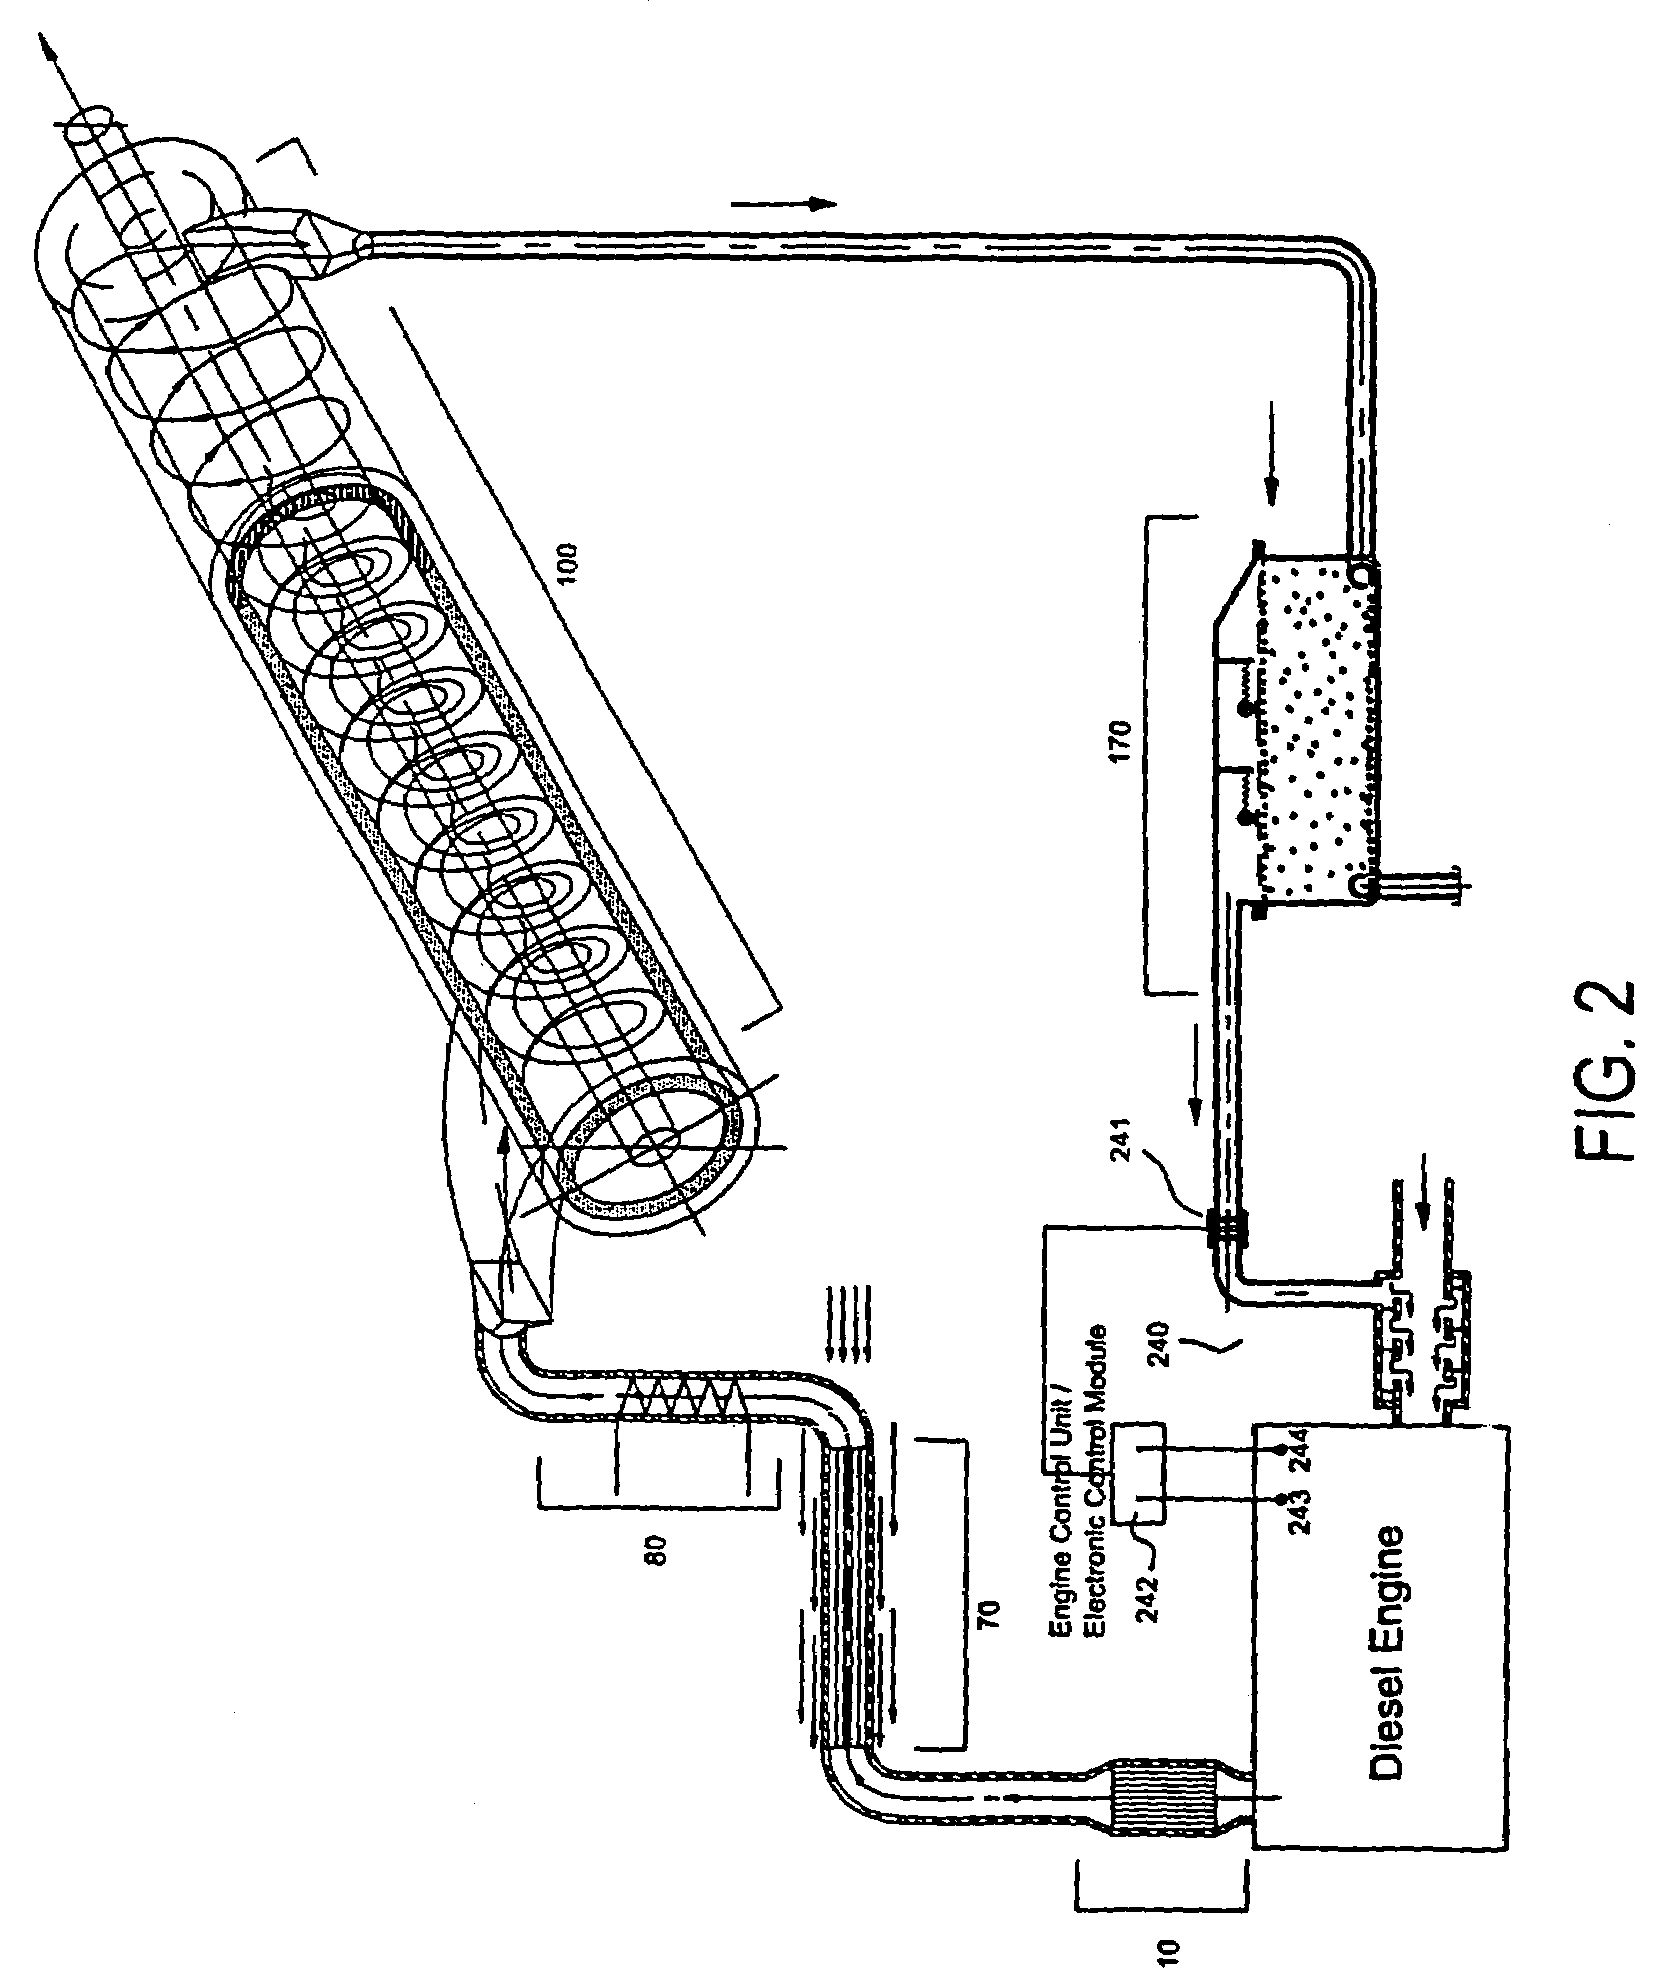 Exhaust after-treatment system for the reduction of pollutants from diesel engine exhaust and related method